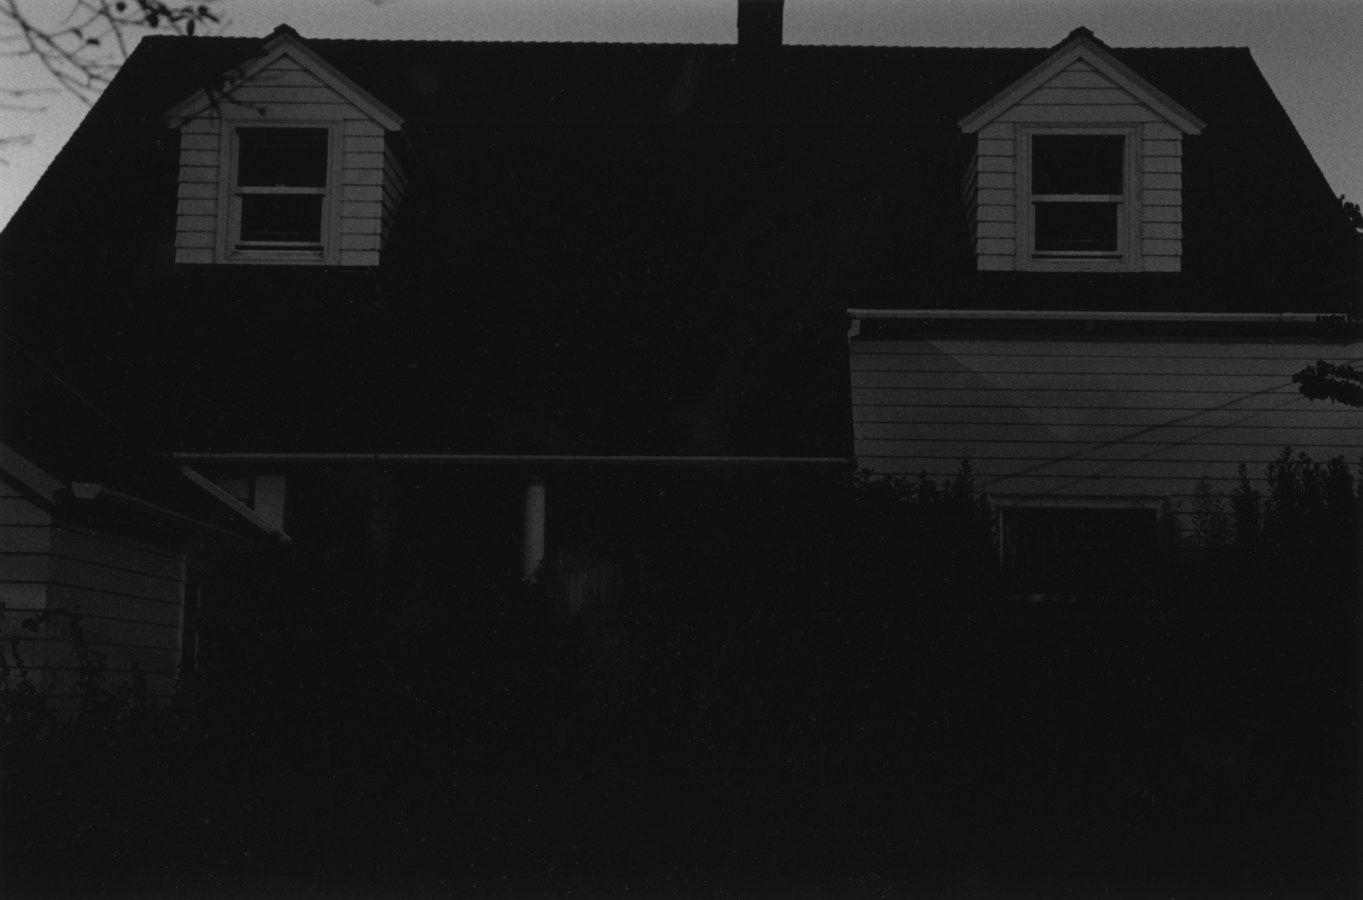 black-and-white vertical photo of a dimly lit house with two dormers